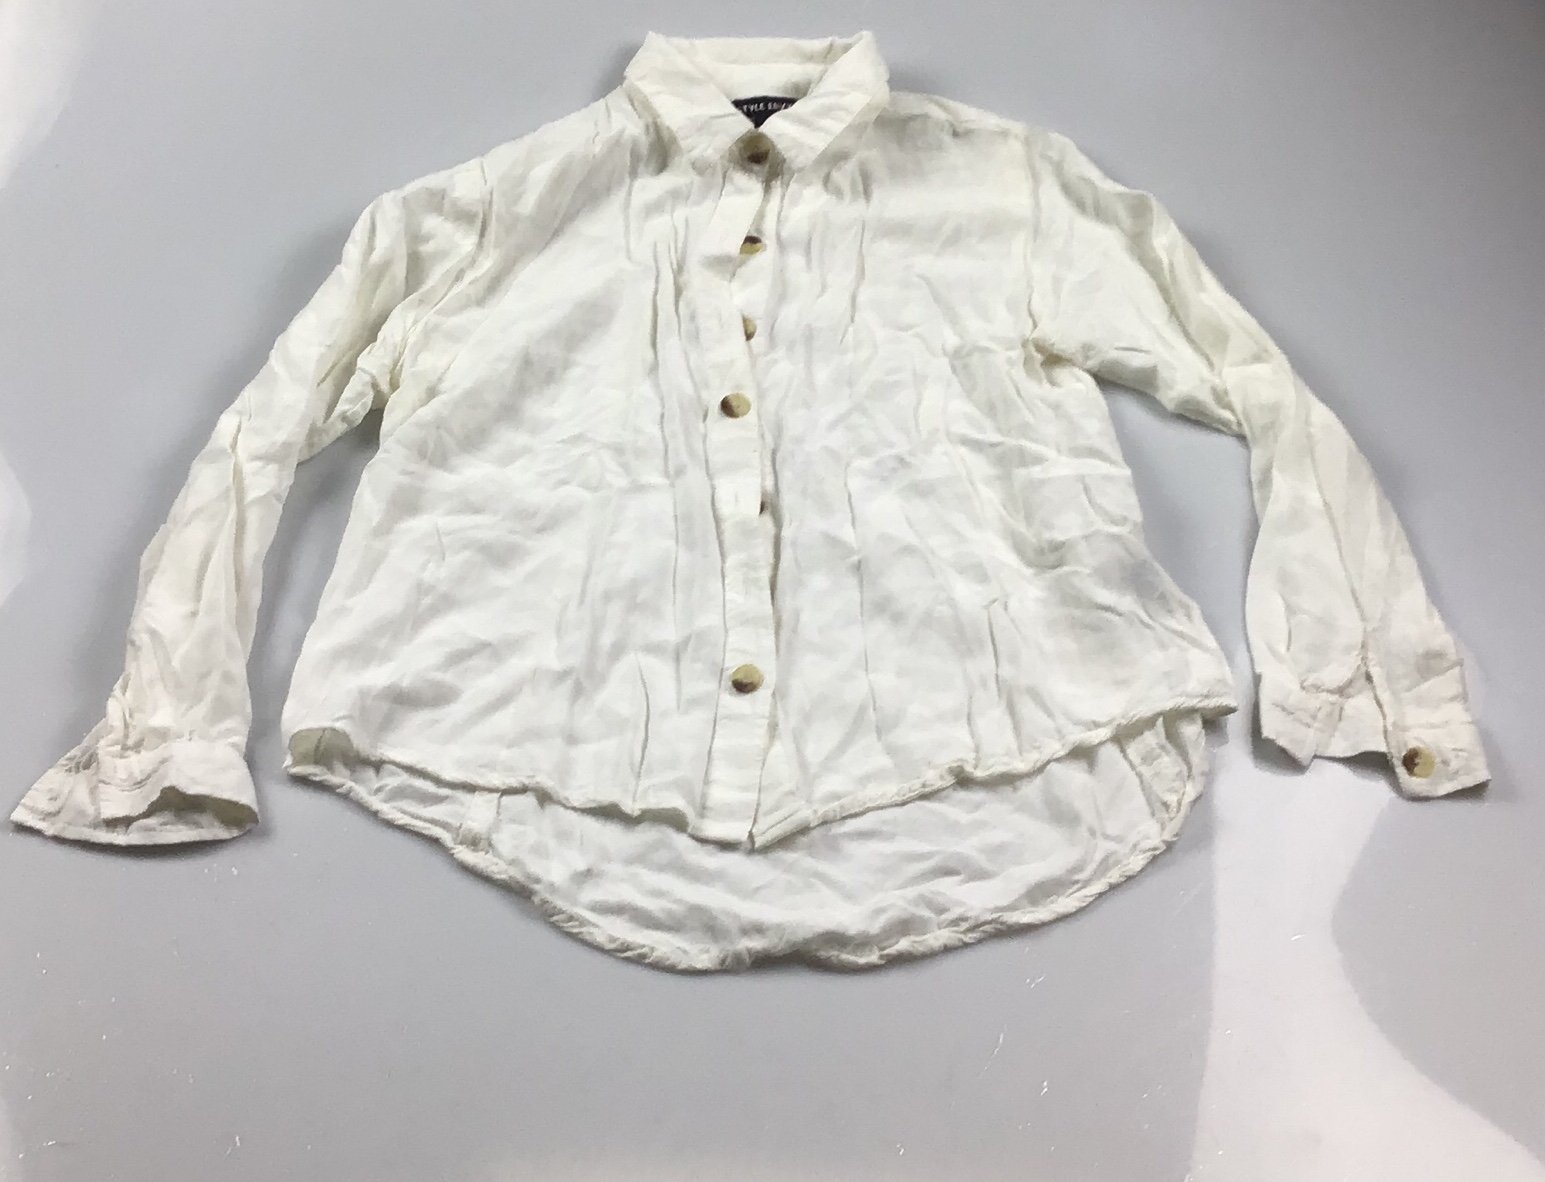 big discount Style Envy women’s button down shirt white size S frm8SYele just buy it